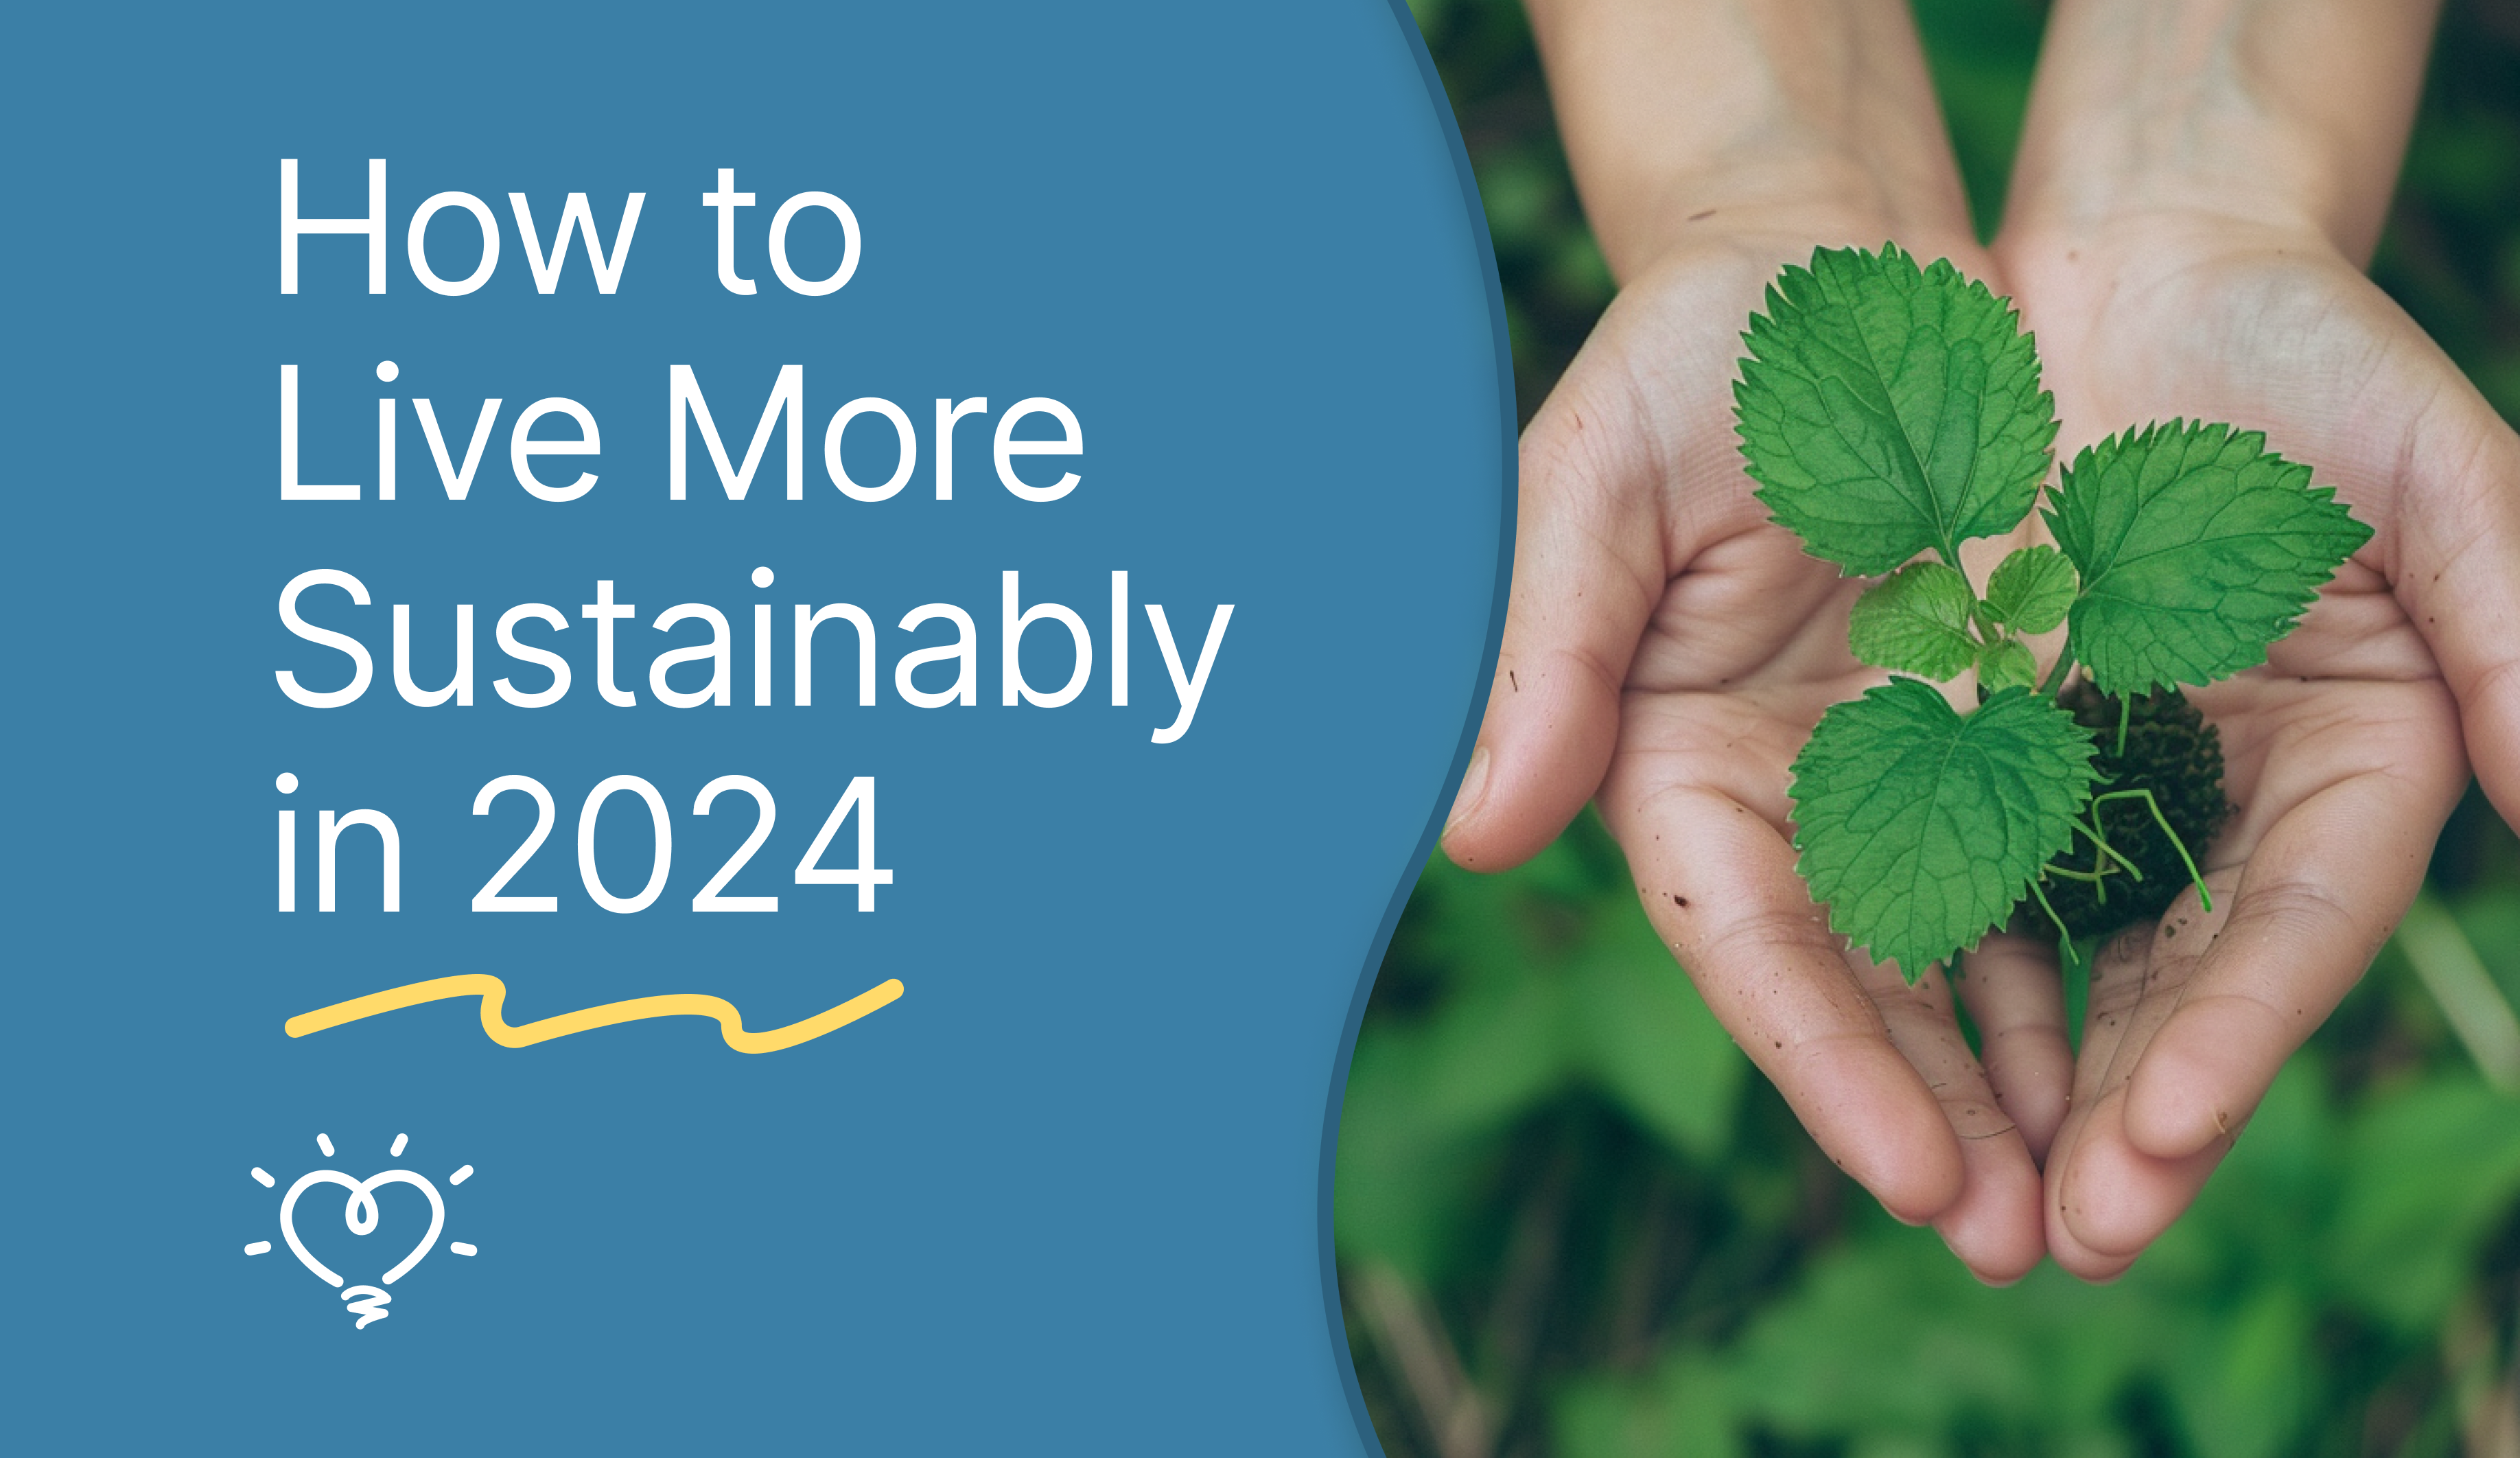 How to Live More Sustainably in 2024